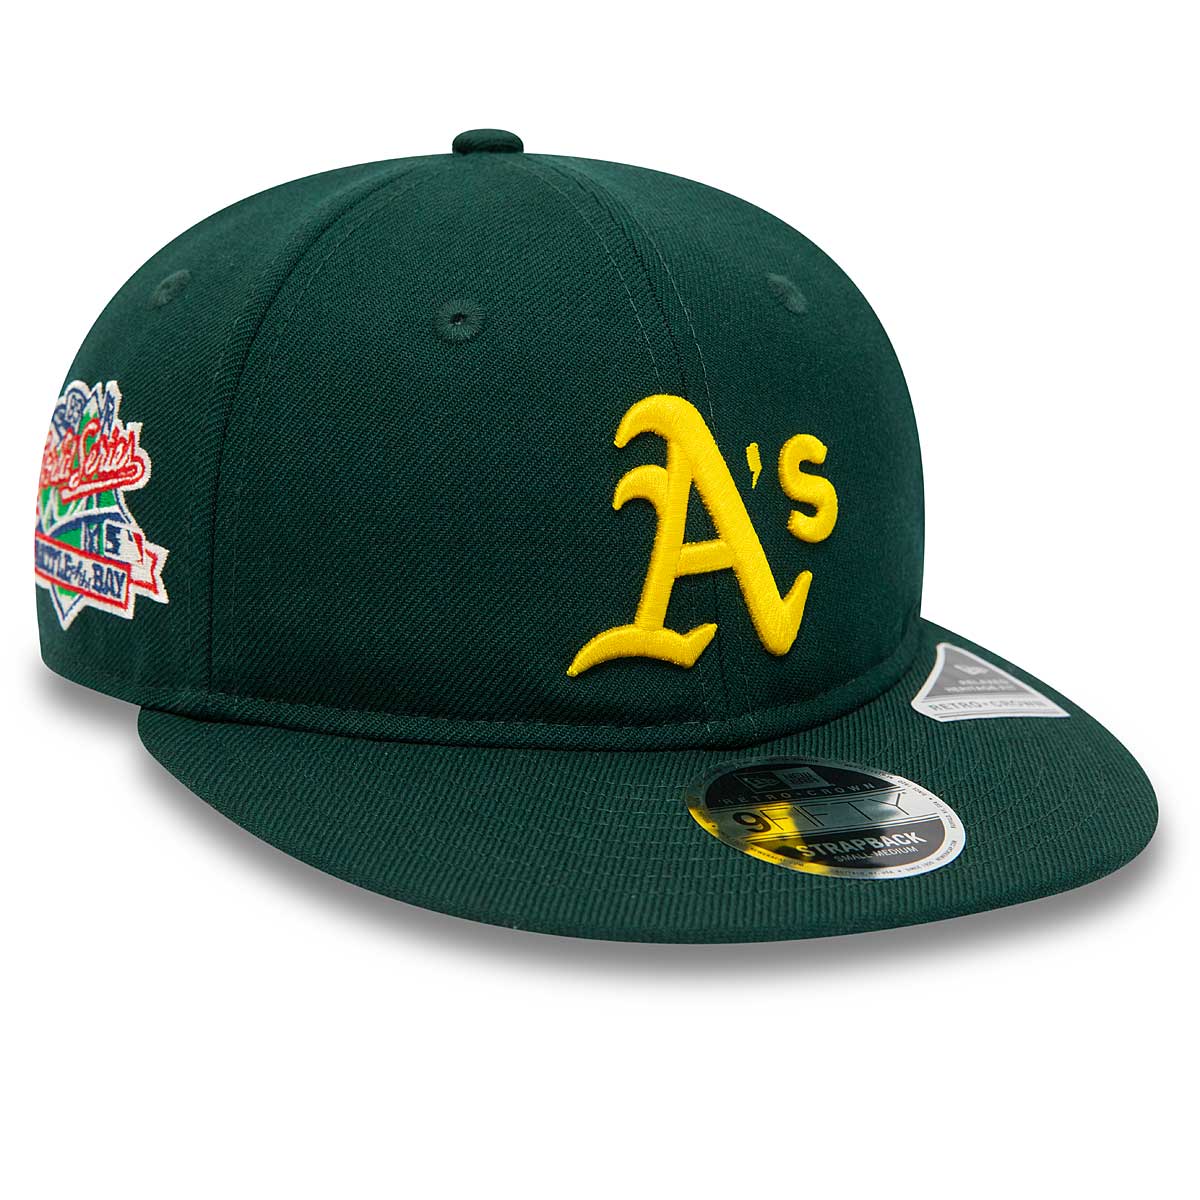 Image of New Era MLB Oakland Athletics Coops World Series Patch 9fifty Rc Cap, Dark Green